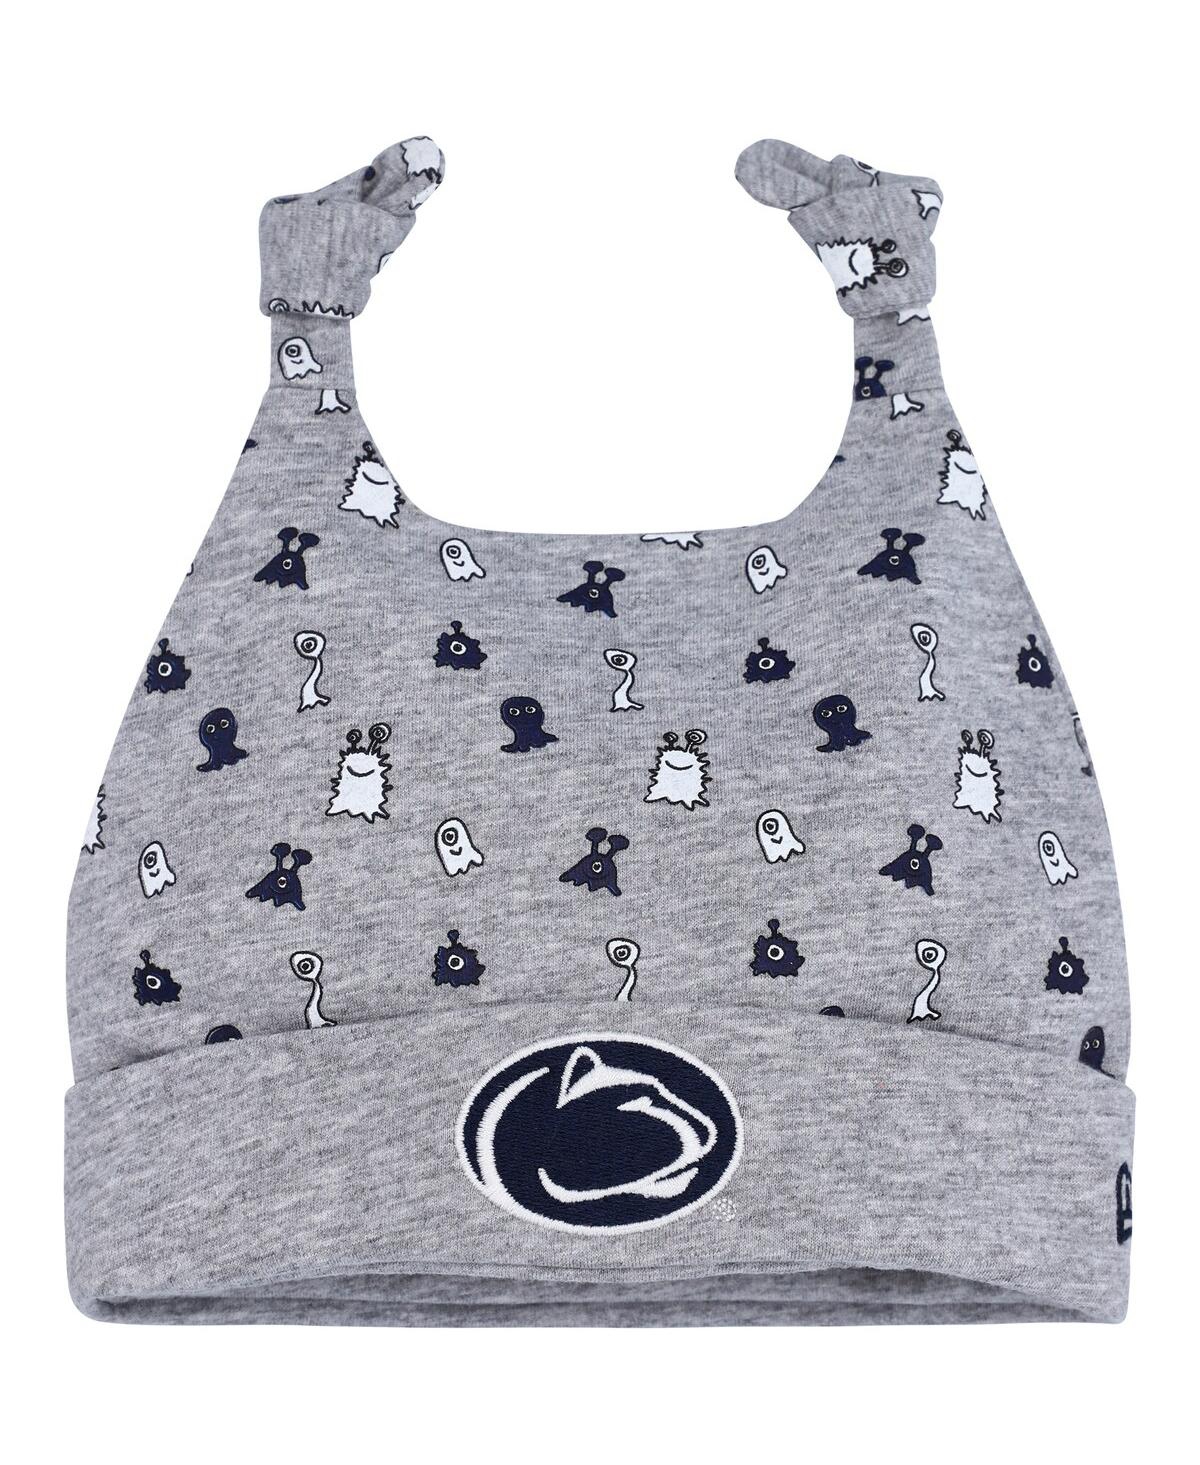 New Era Babies' Newborn And Infant Boys And Girls  Heather Gray Penn State Nittany Lions Critter Cuffed Knit